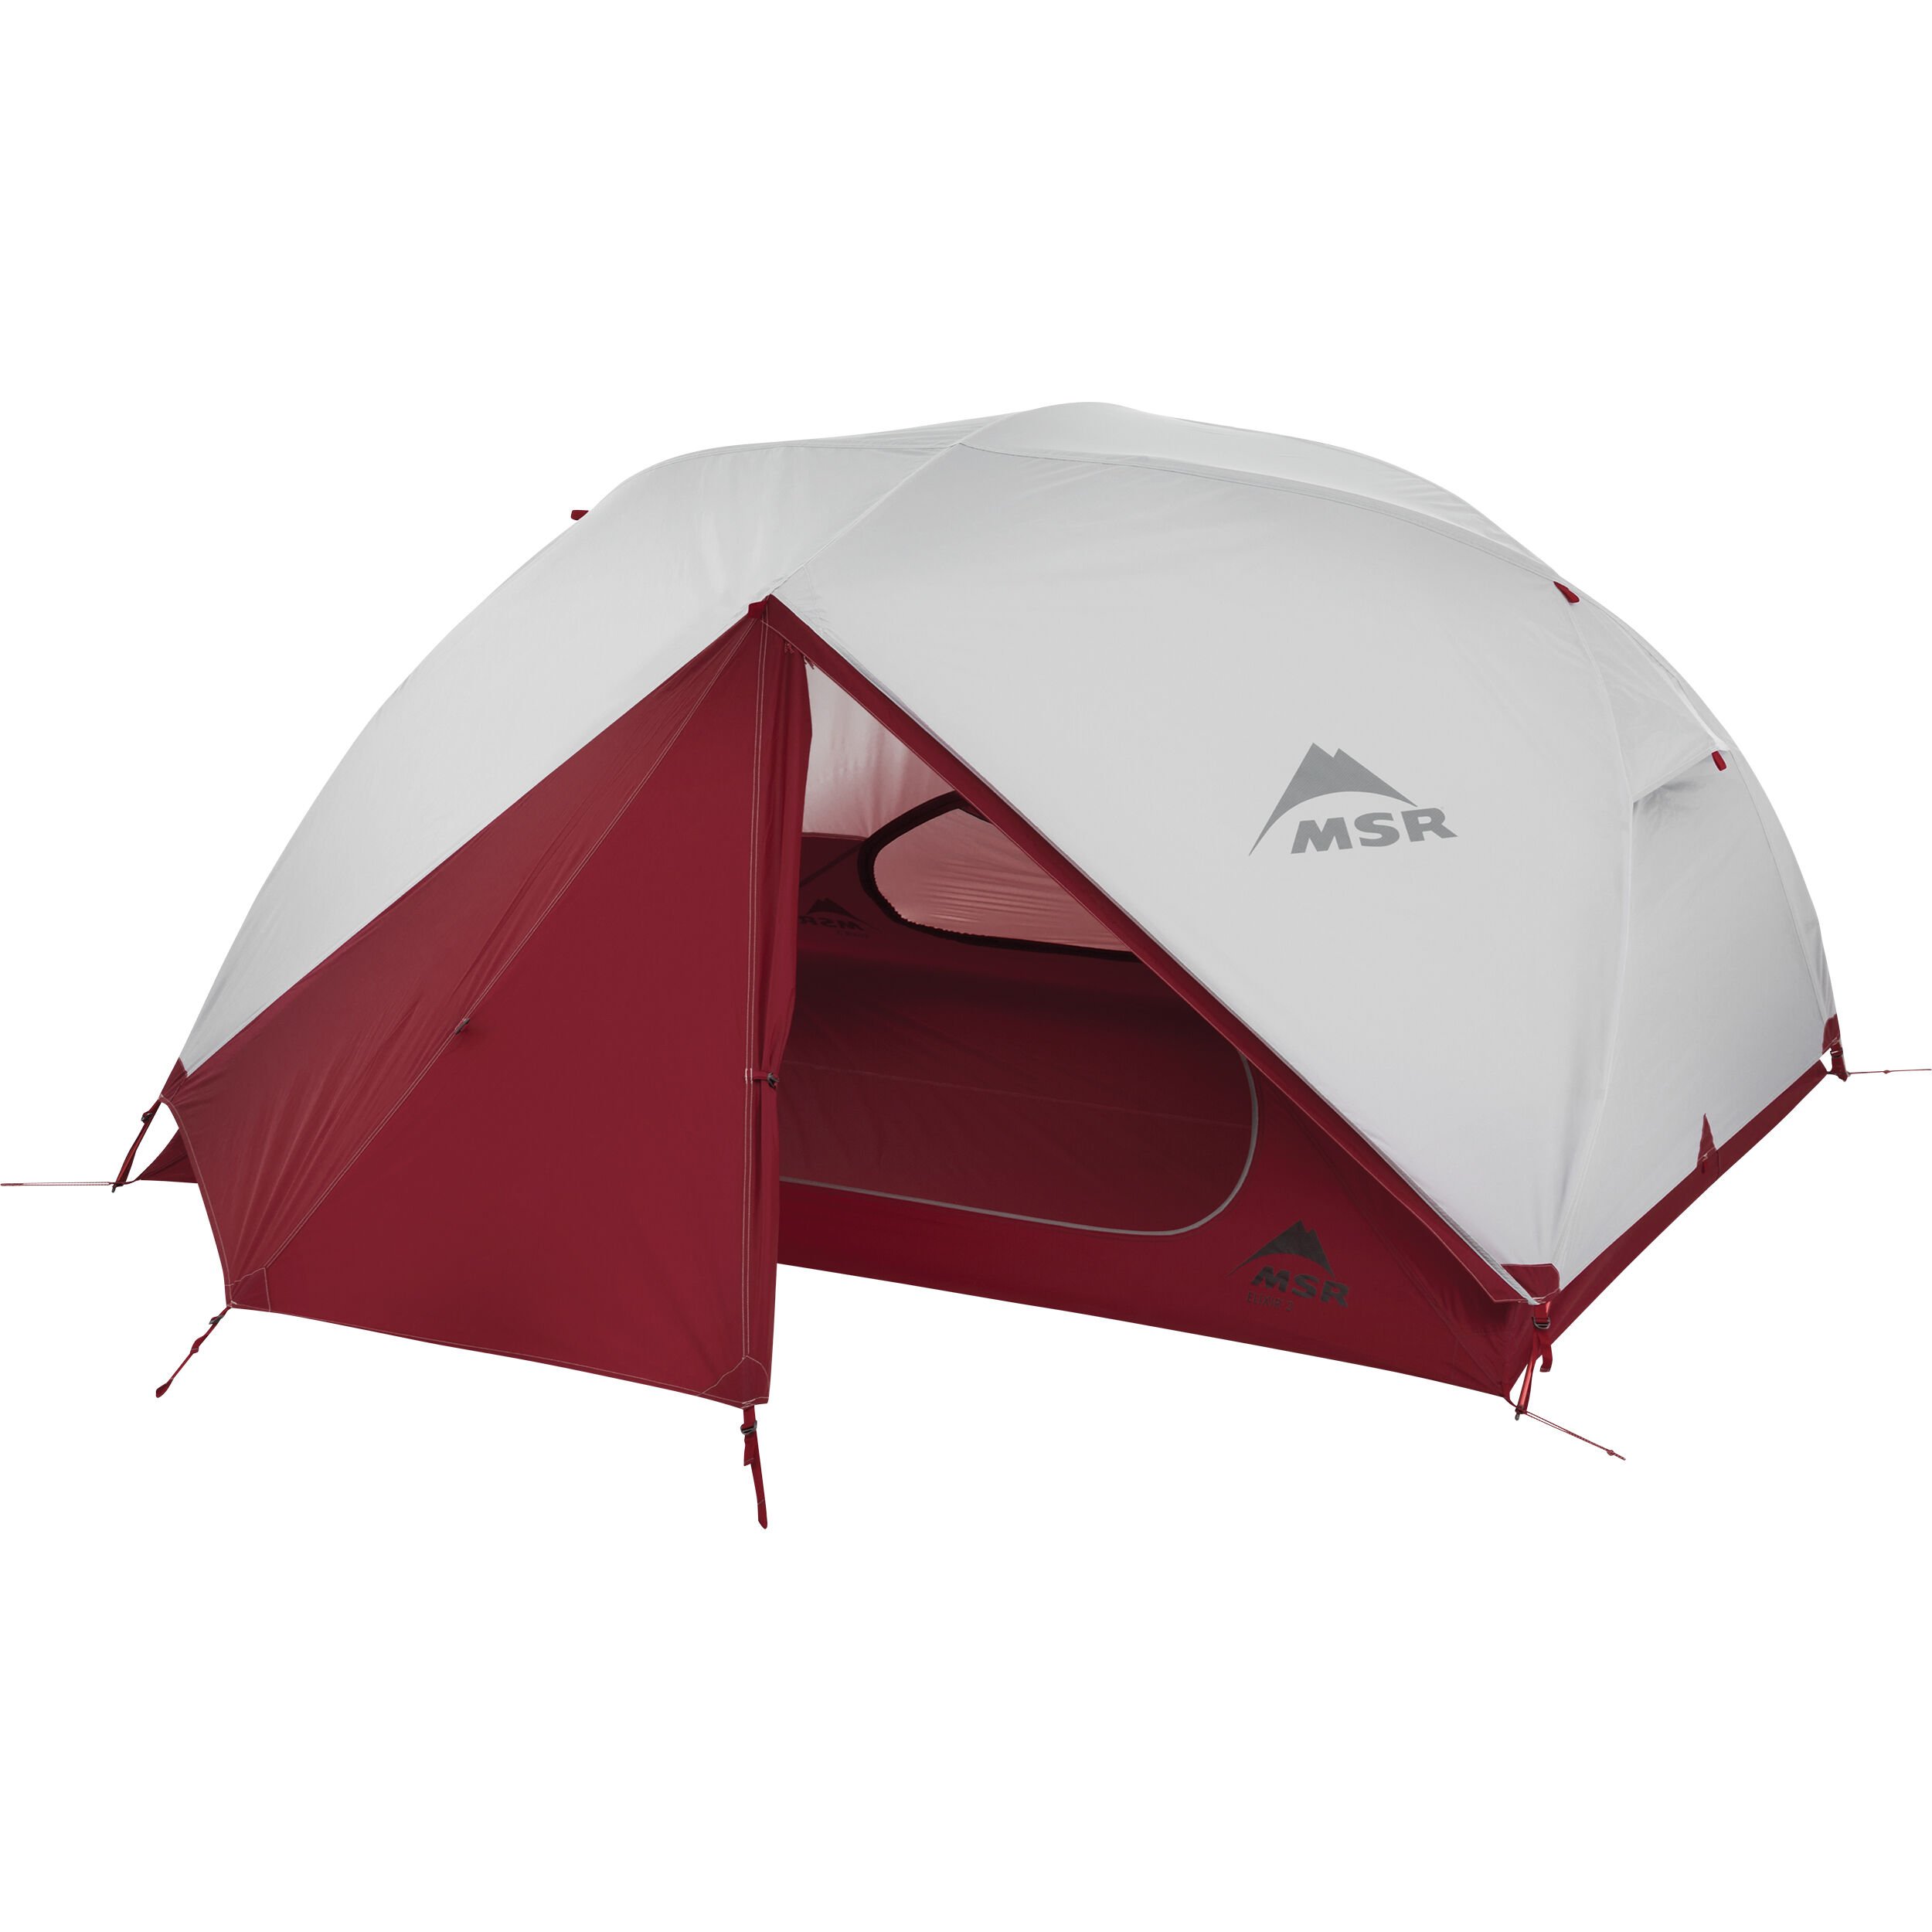 MSR Gear Shed for Elixir™ & Hubba Hubba™ Tent Series Doubles 